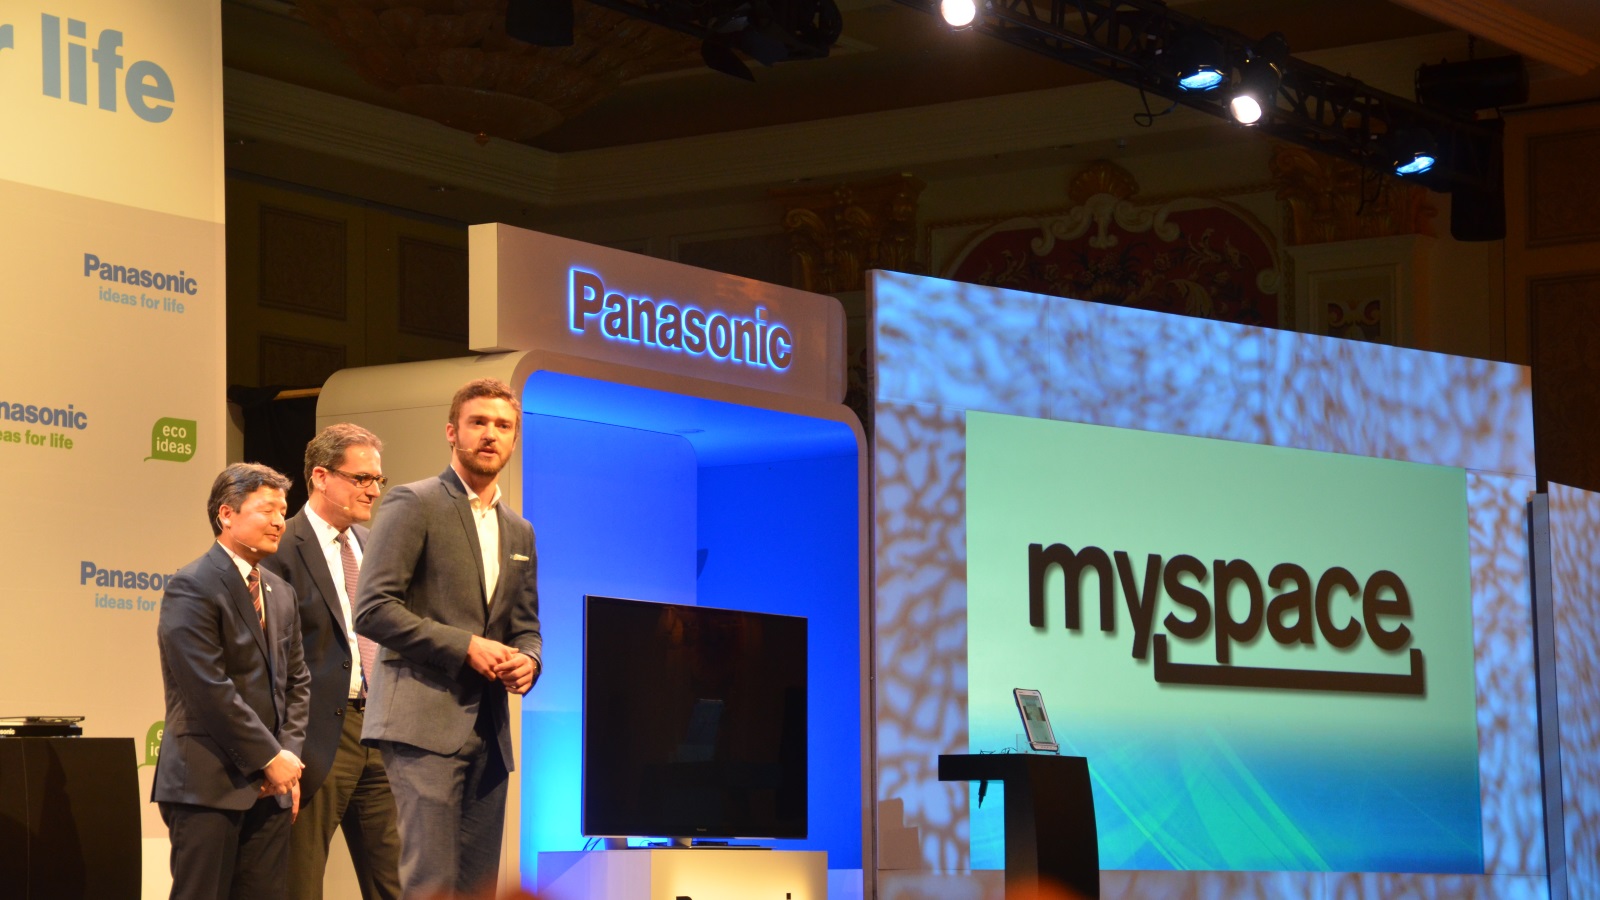 mySpace Owner Justin Timberlake at CES with Panasonic